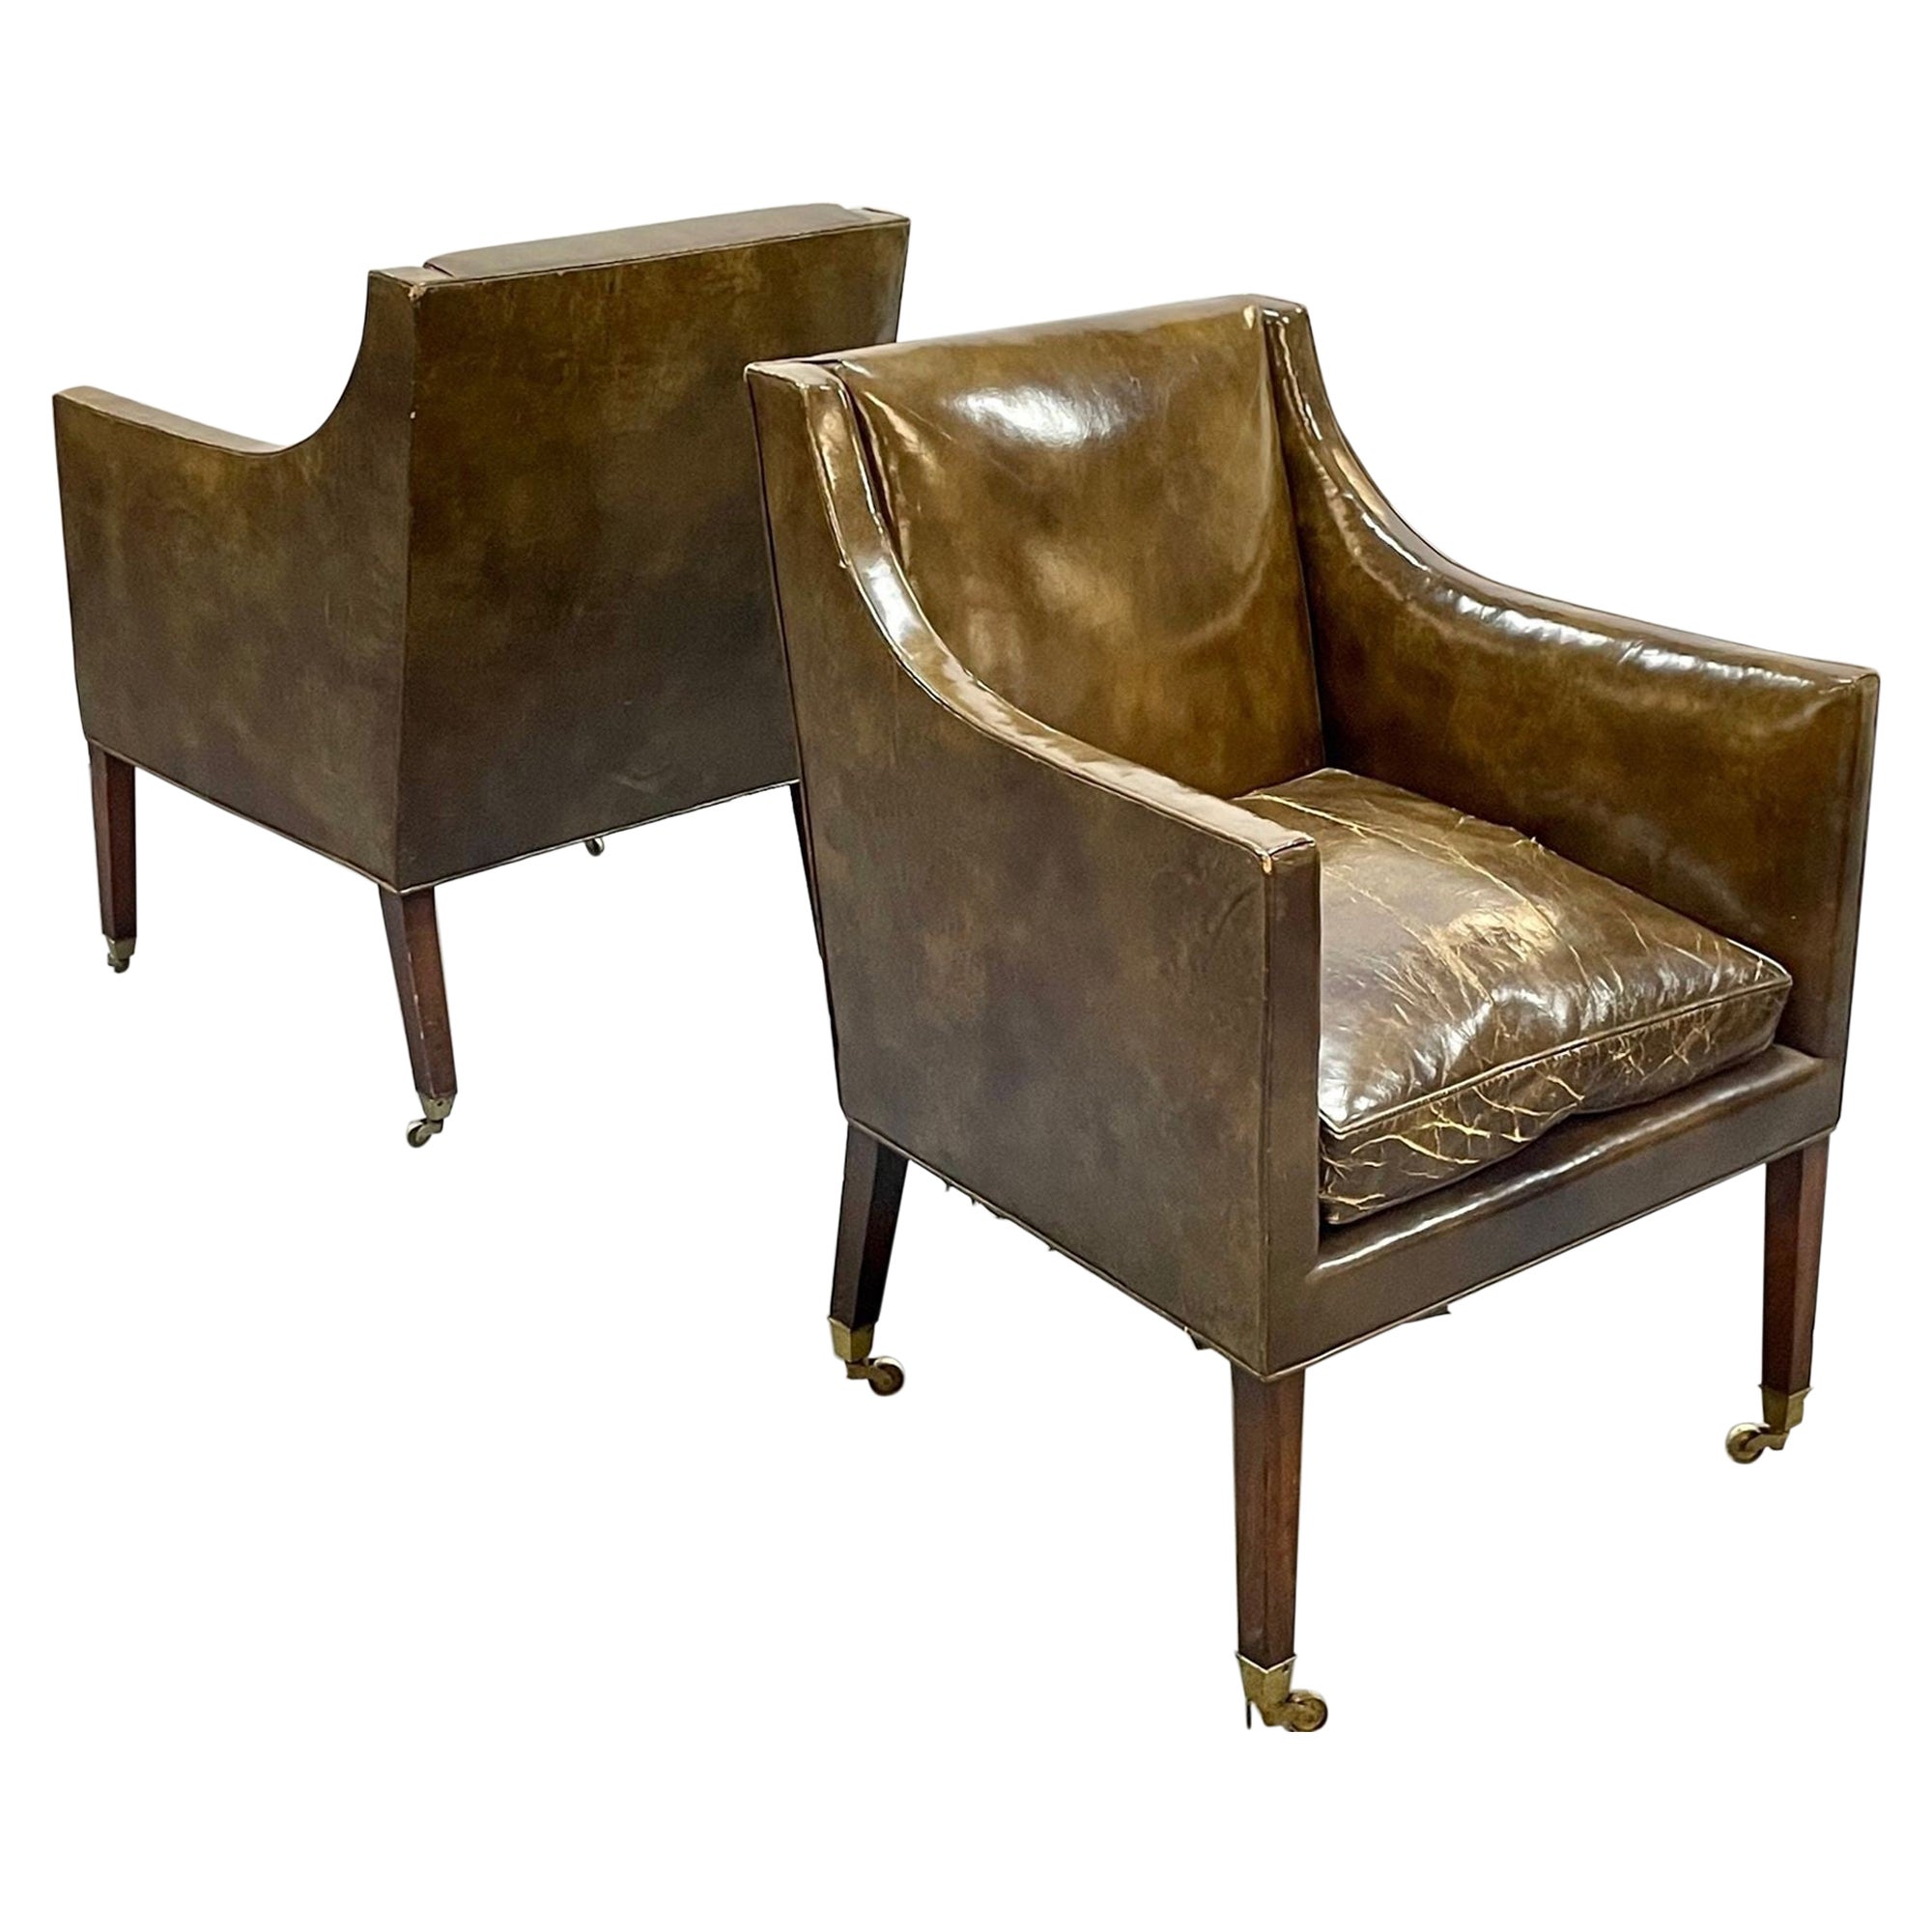 Pair of Patinated Regency Style Leather Upholstered Armchairs / Lounge, Bronze